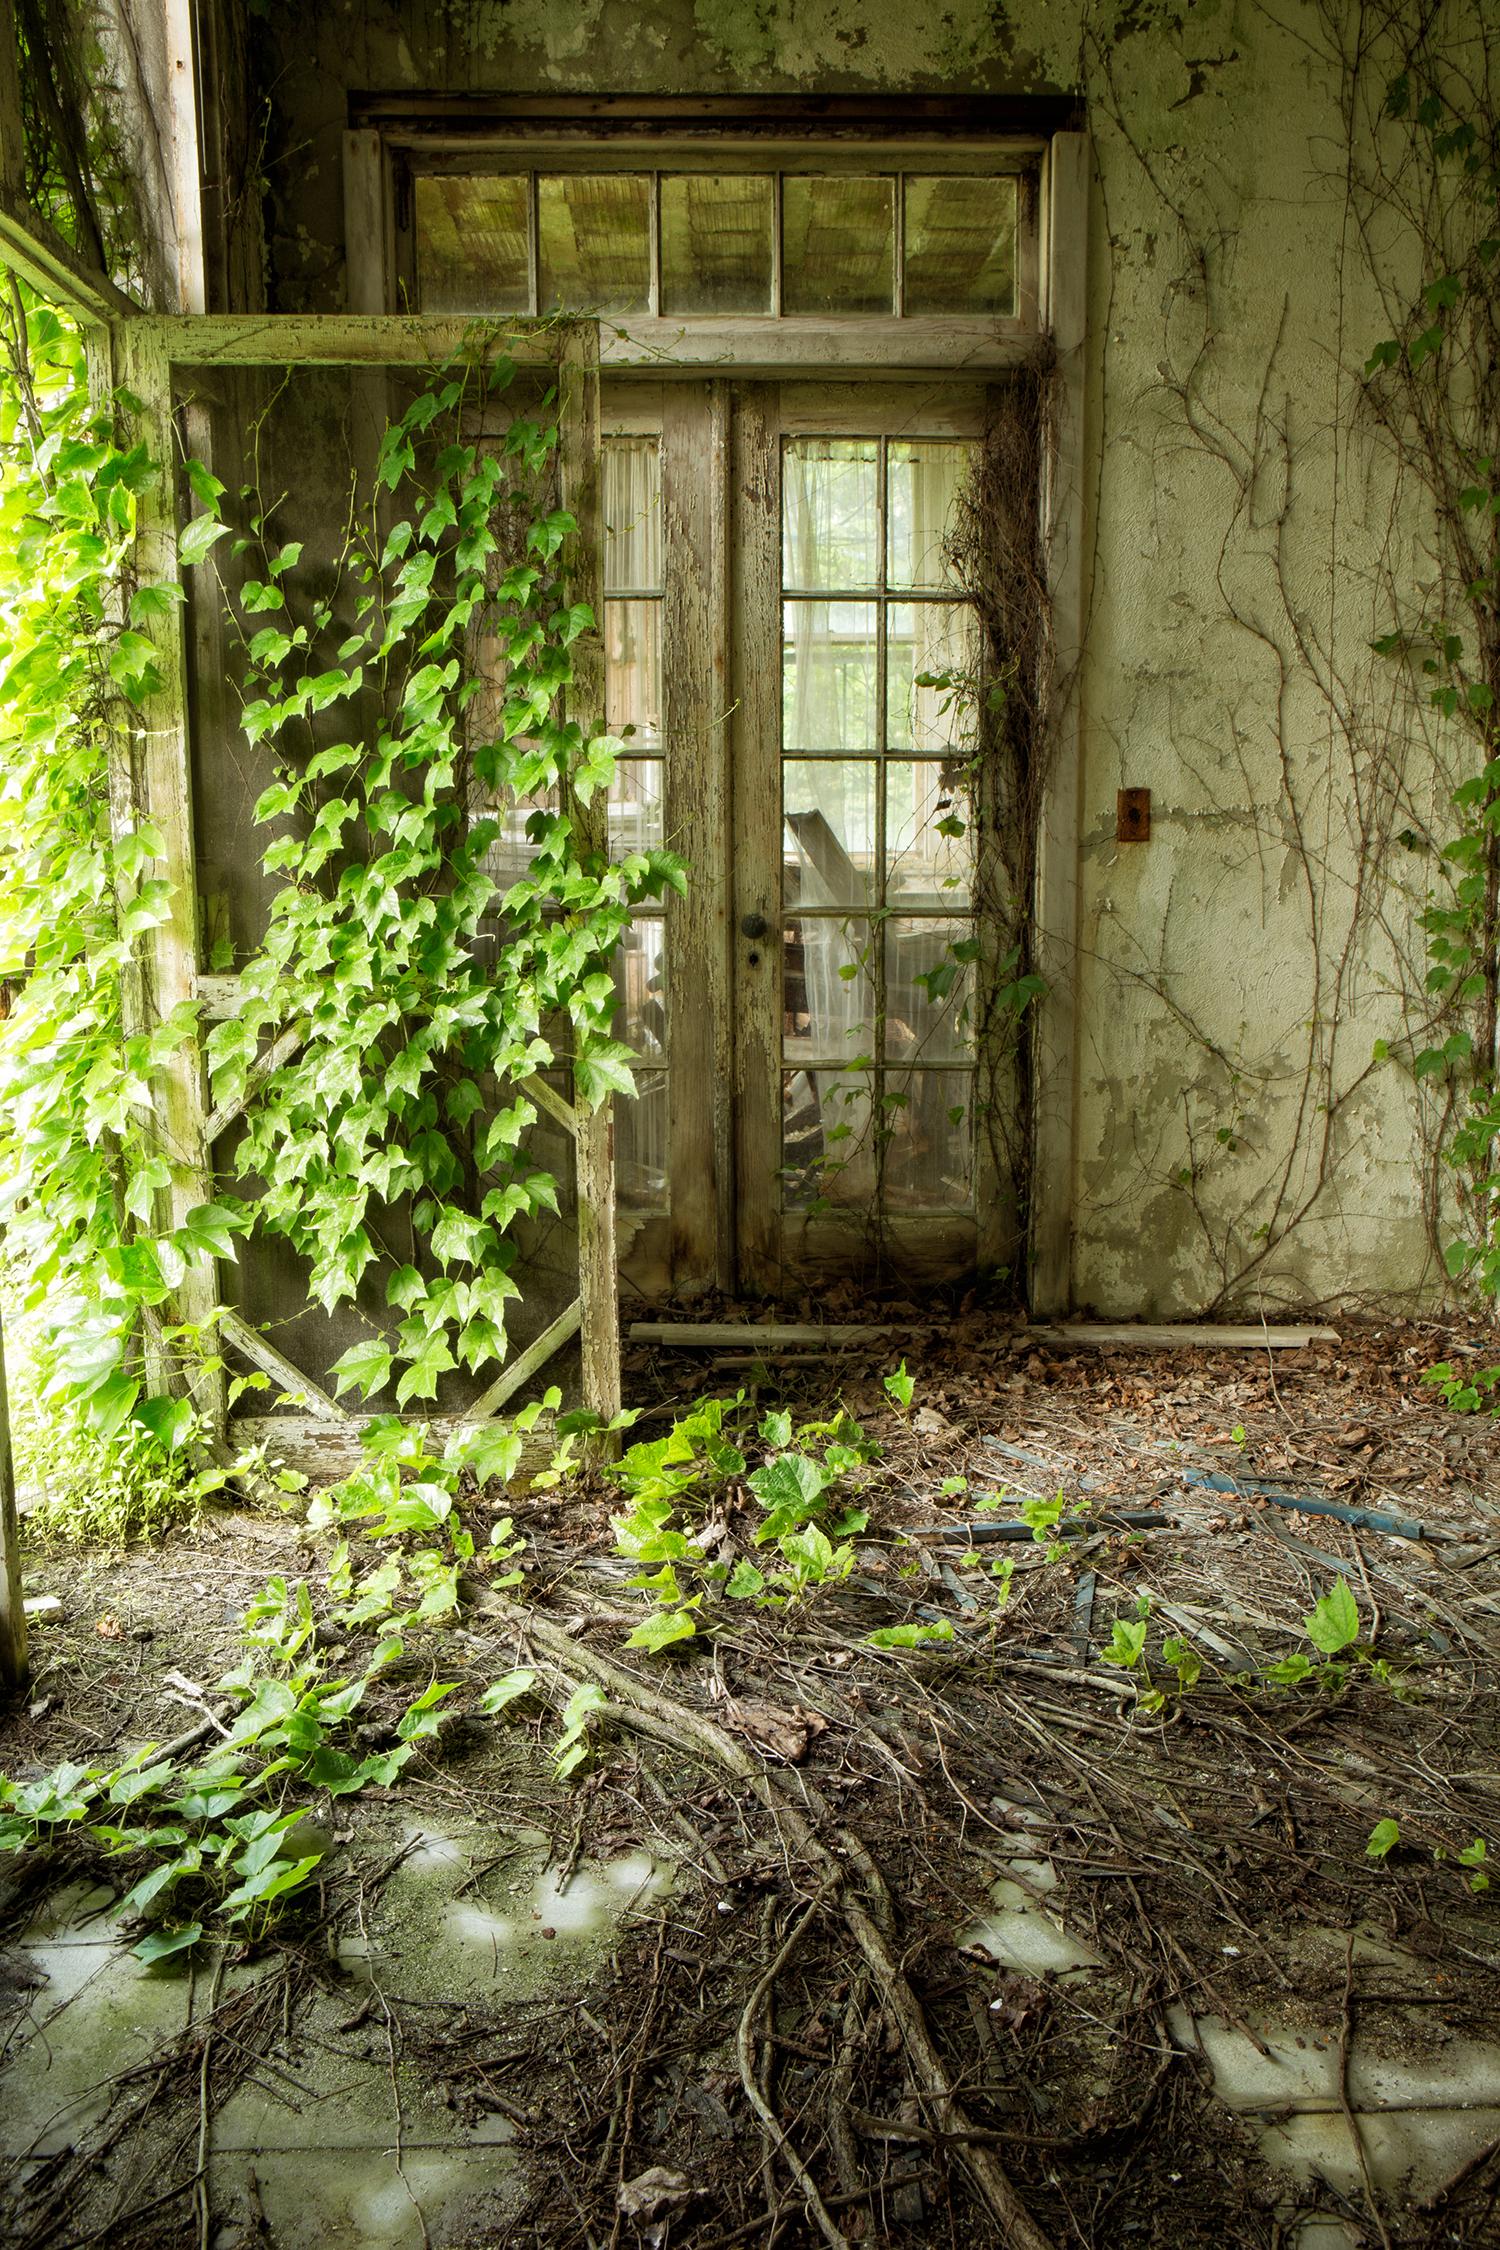 "Within", color photograph, abandoned, nature, vines, doors, porch, green